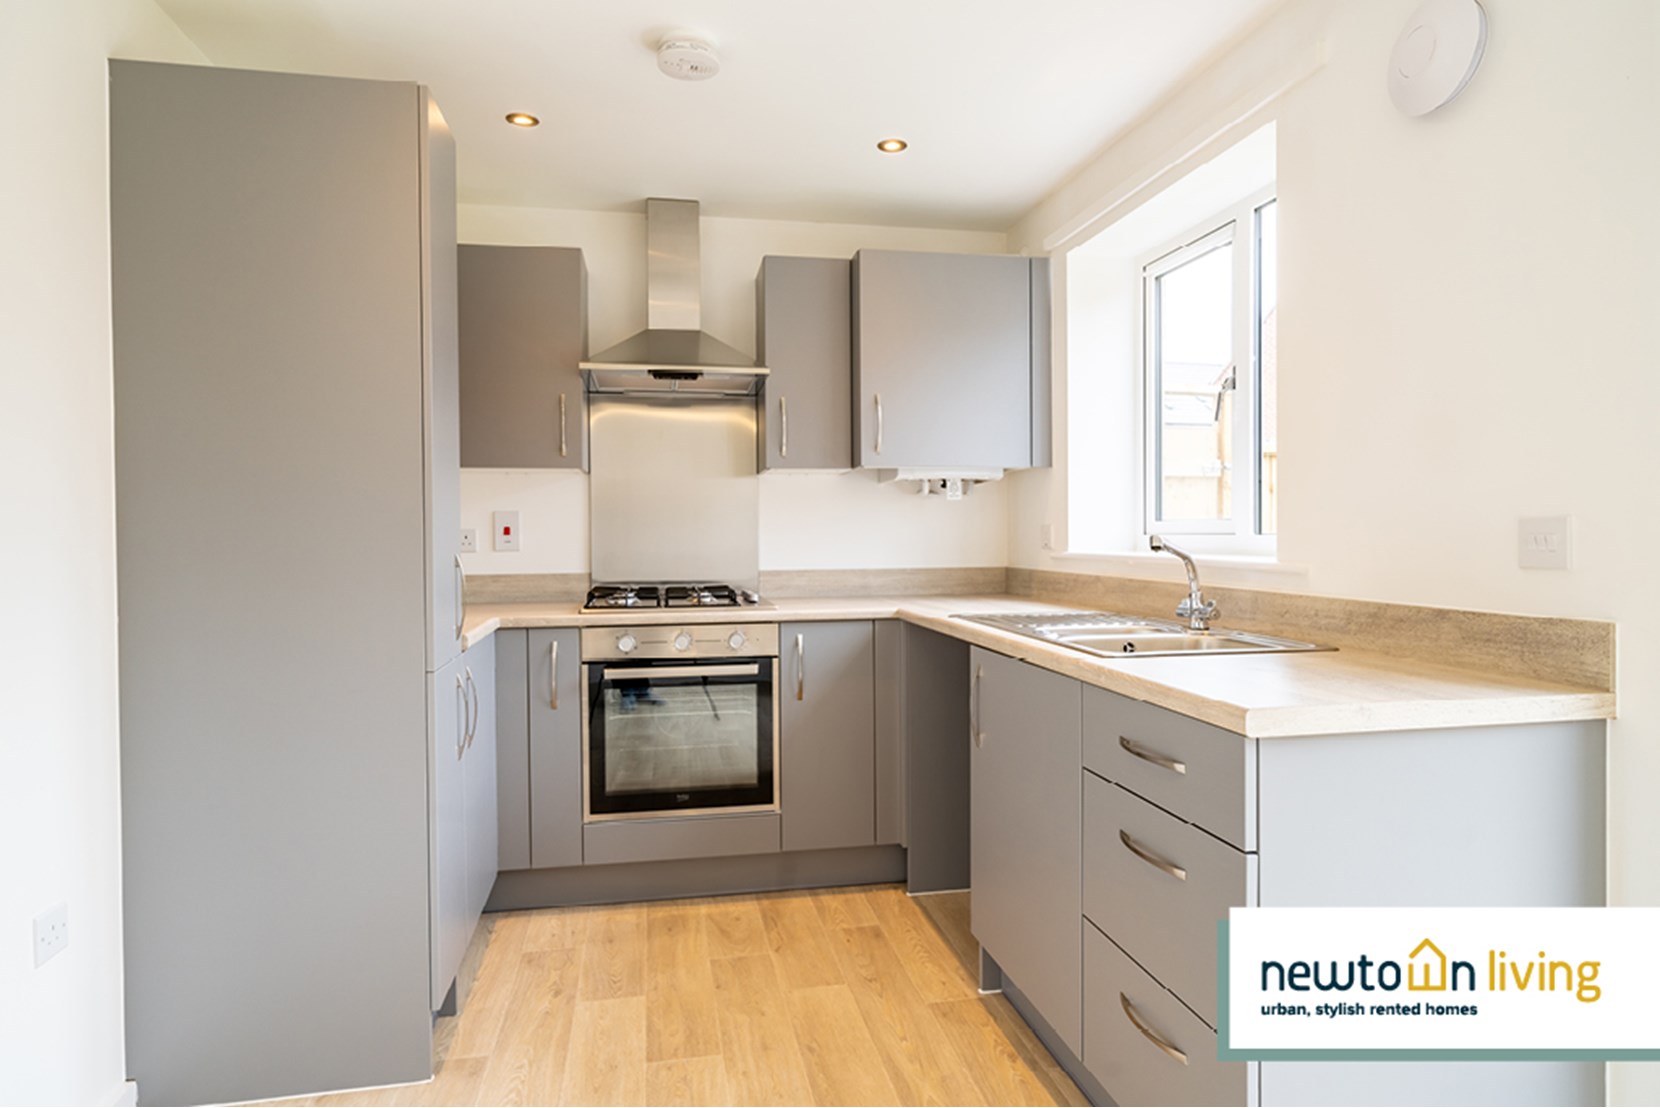 Houses to Rent by Newton Living at Lock 44, Leicester, LE4, kitchen